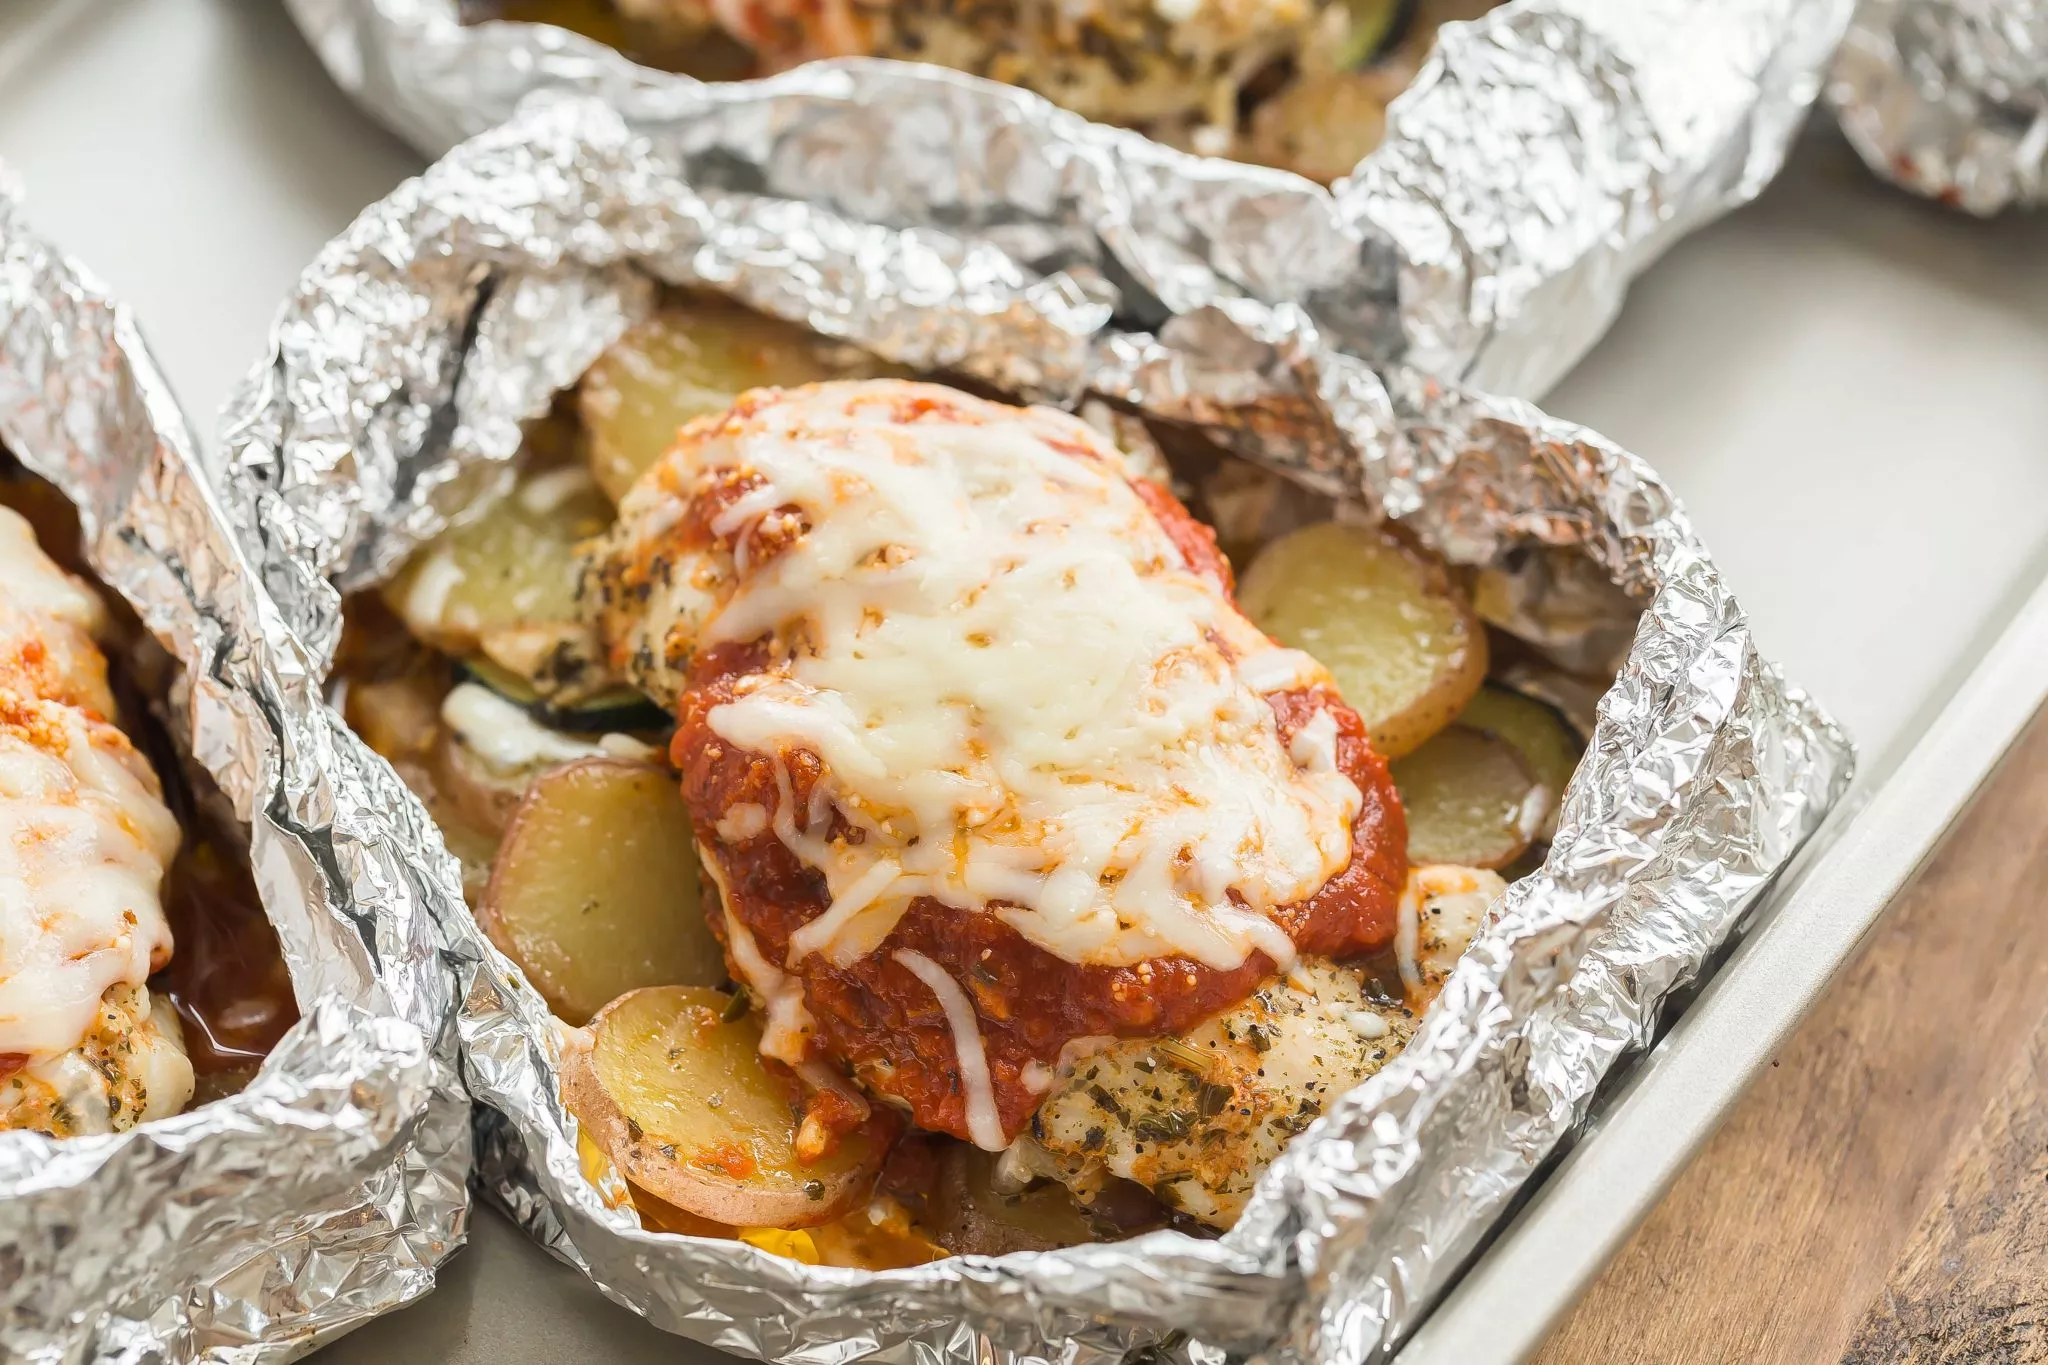 A delicious foil pack dinner with chicken breasts and little potatoes absolutely covered in cheesy goodness.